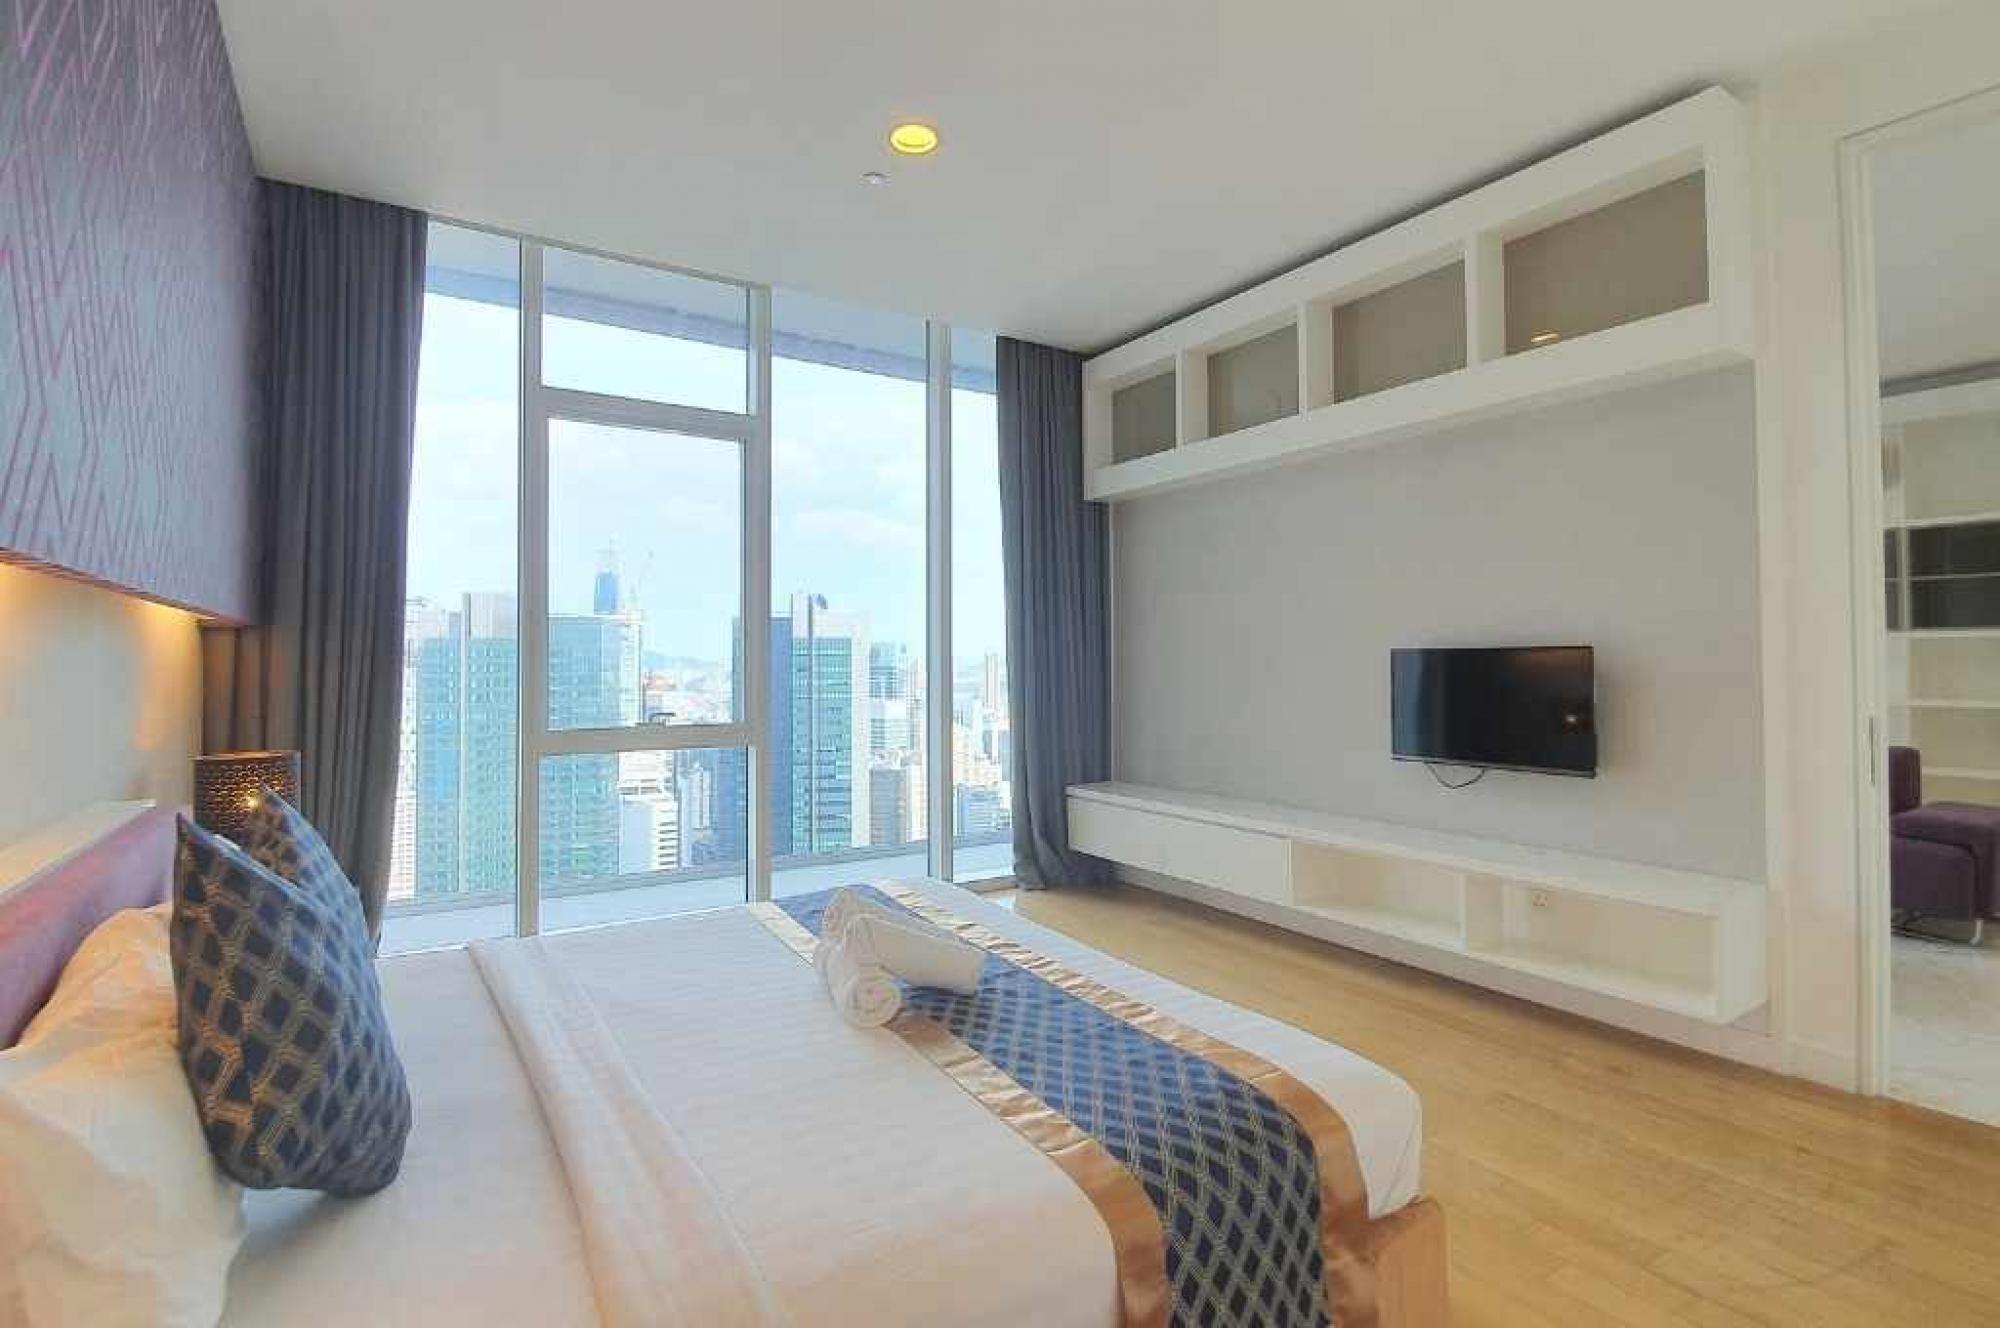 Property Image 1 - Fabulous Bright Home in the heart of Kuala Lumpur